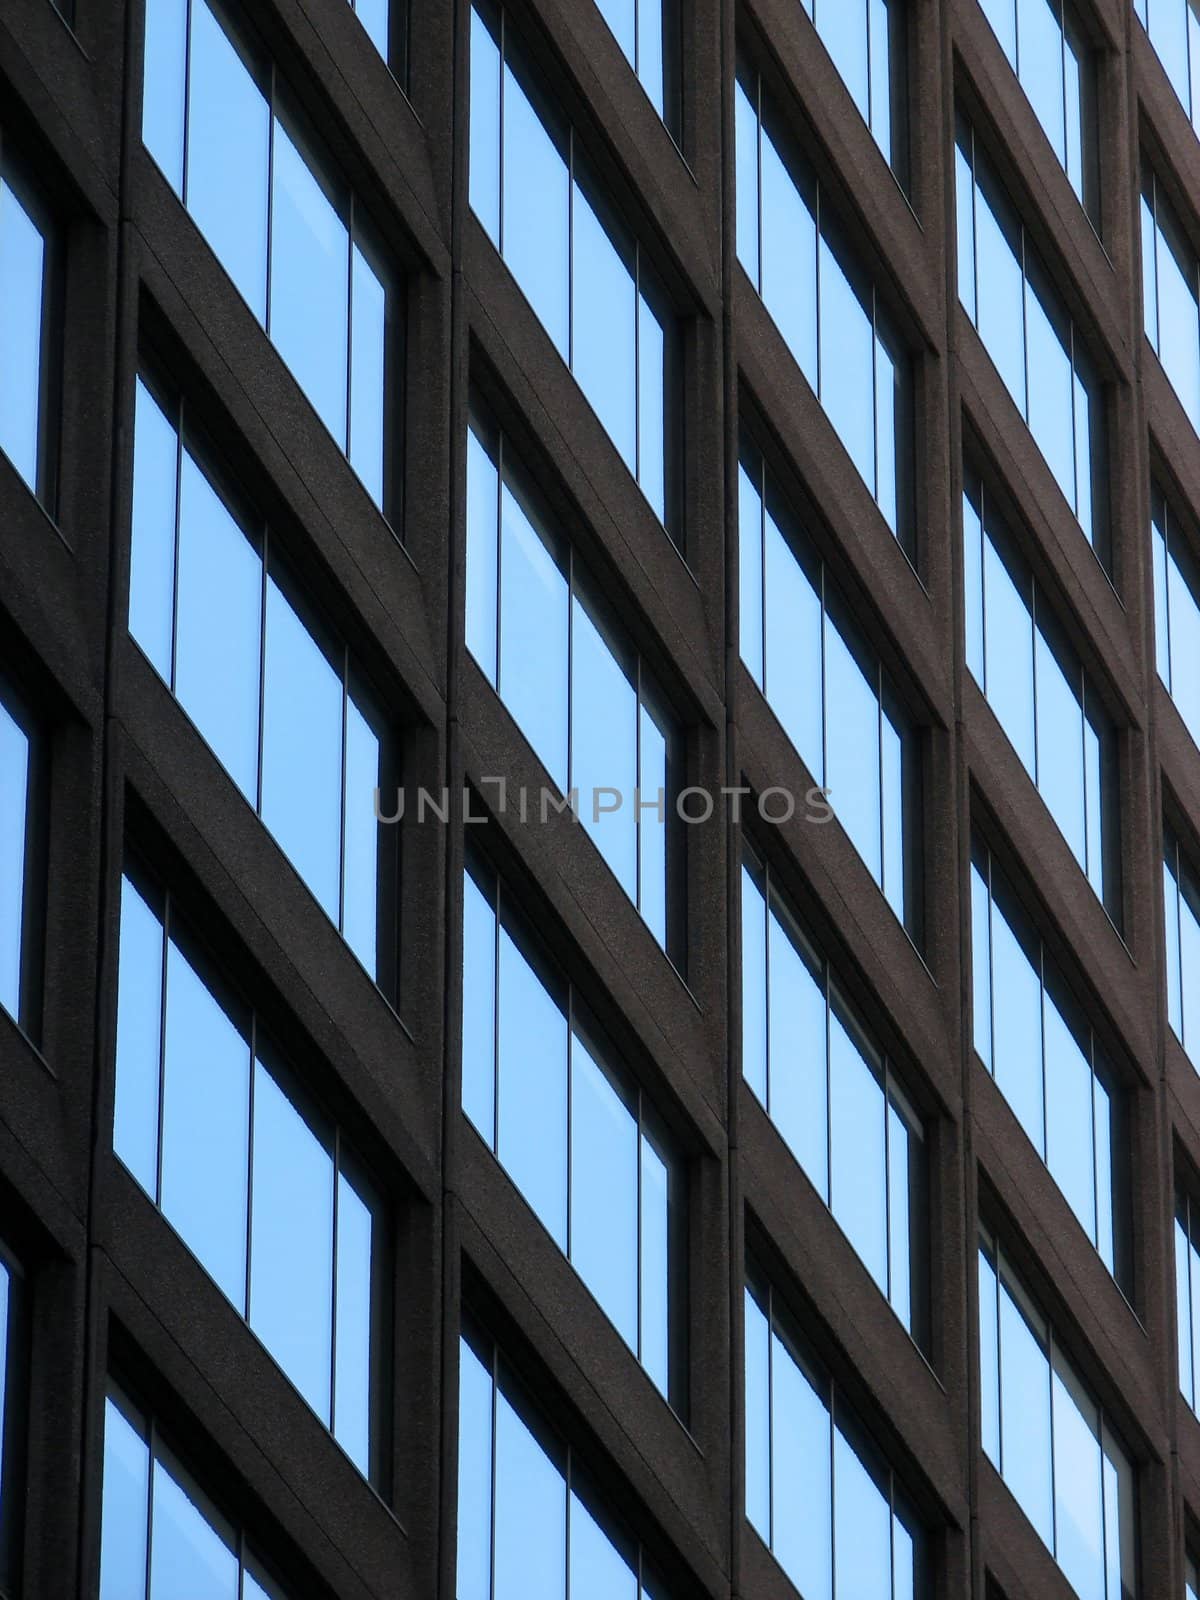 Windows of an office building by anikasalsera